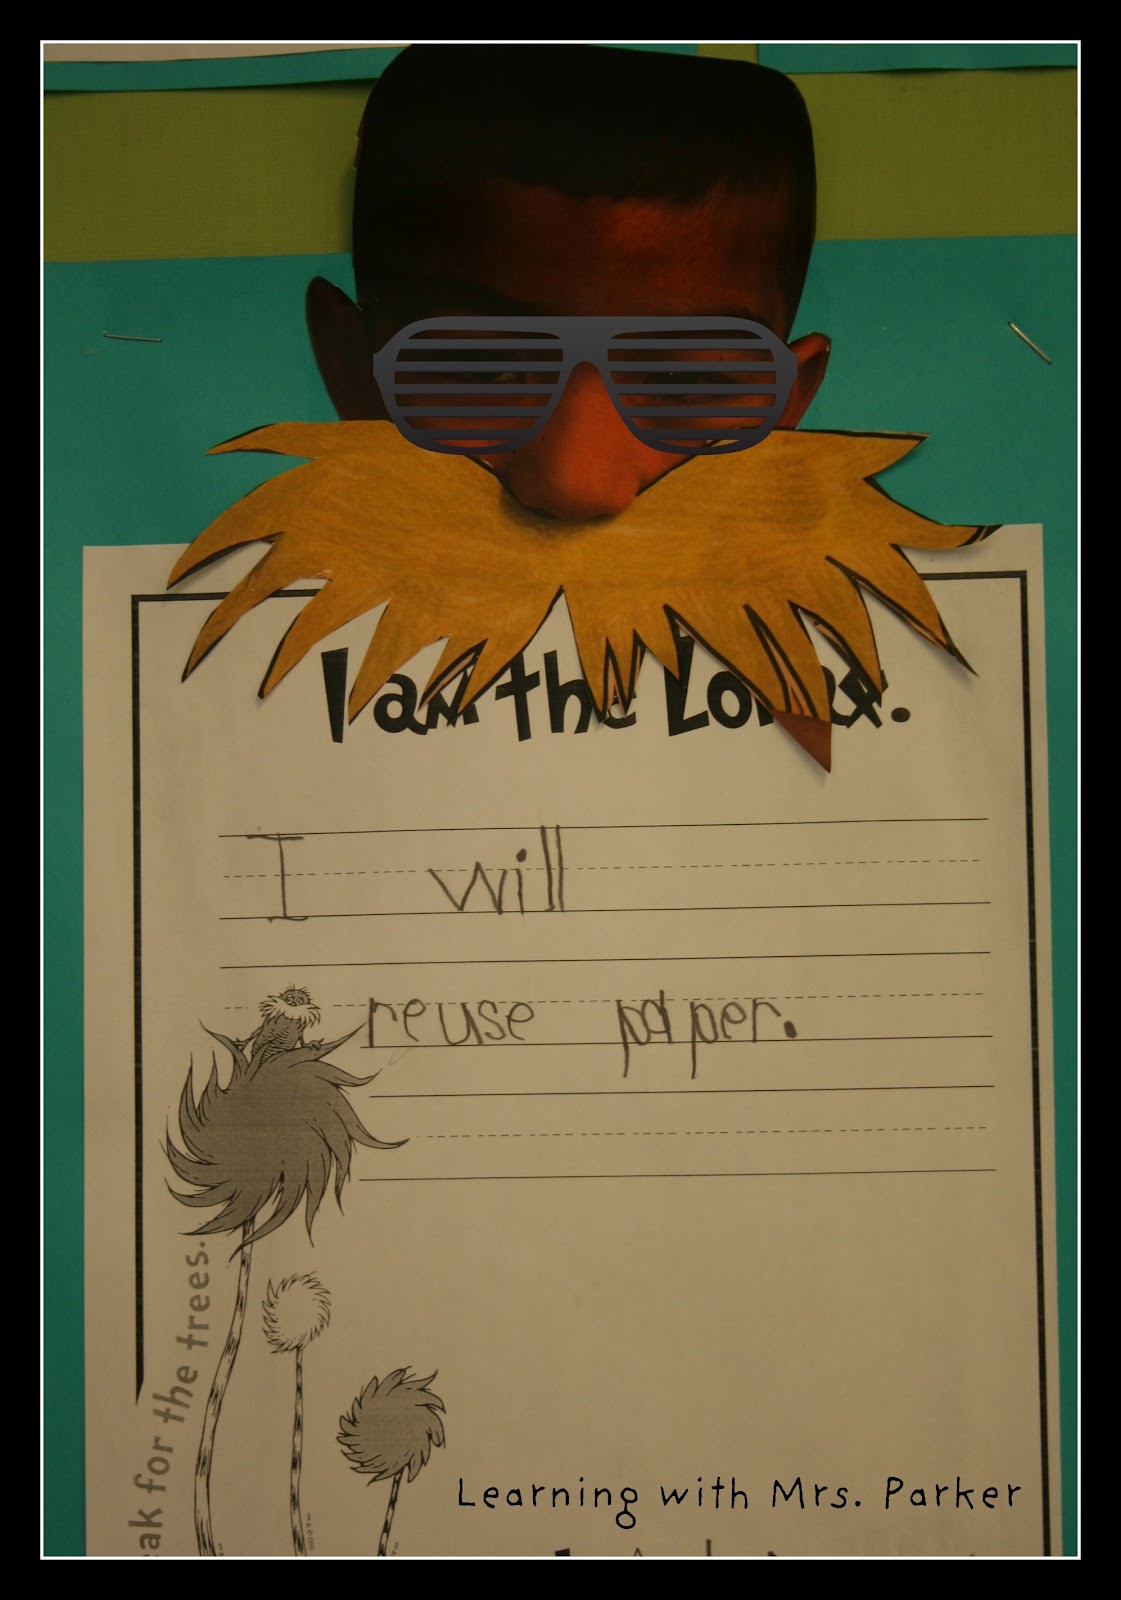 Essay about the lorax